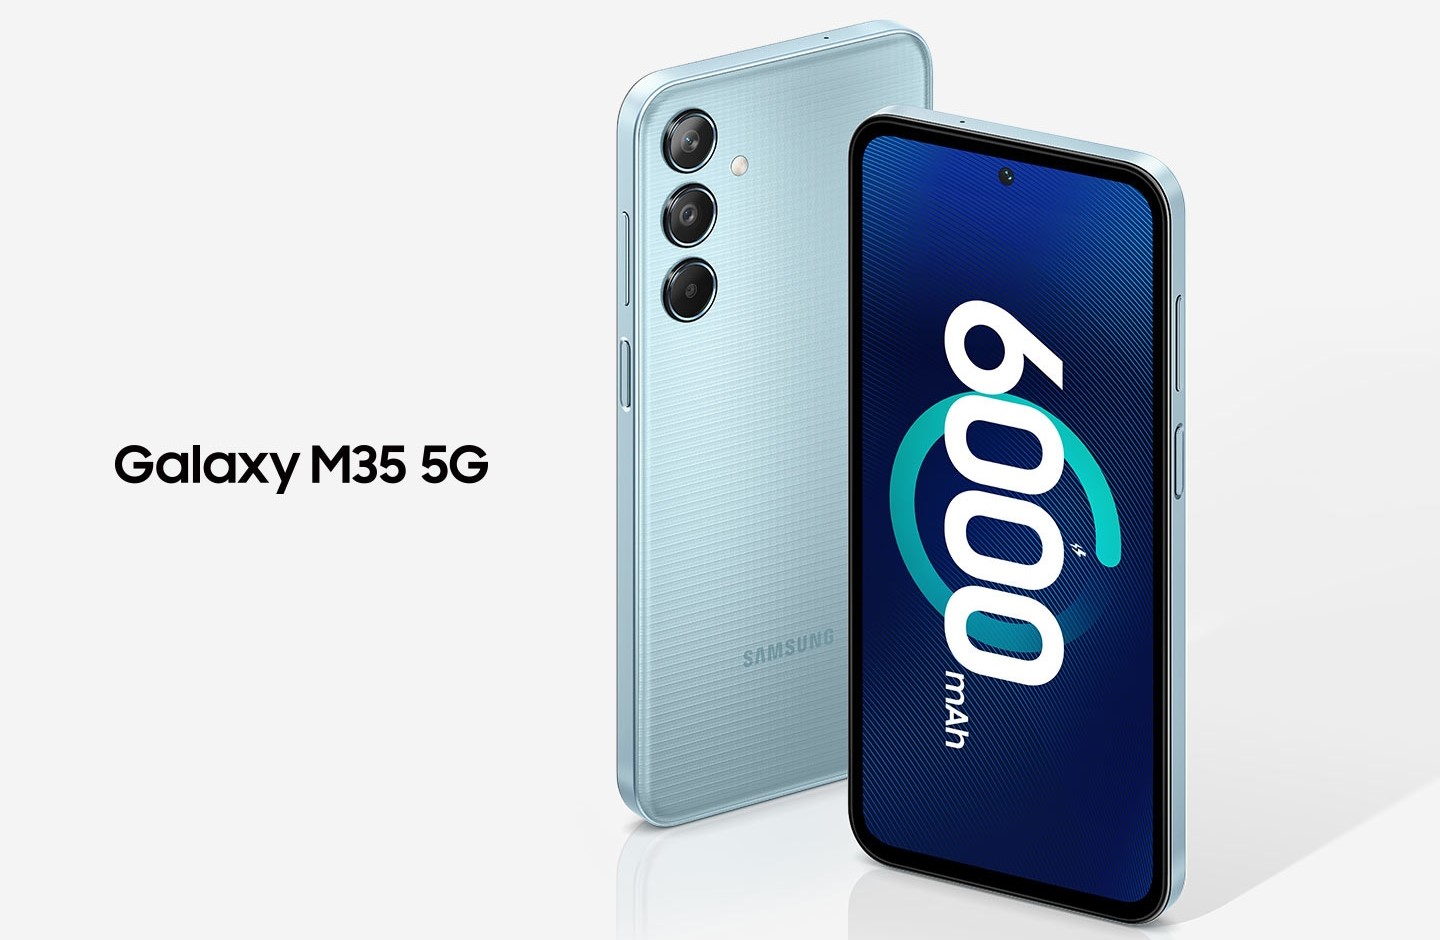 Samsung Galaxy M35 5G: Powerful mid-range option with 6000 mAh battery in Nepal